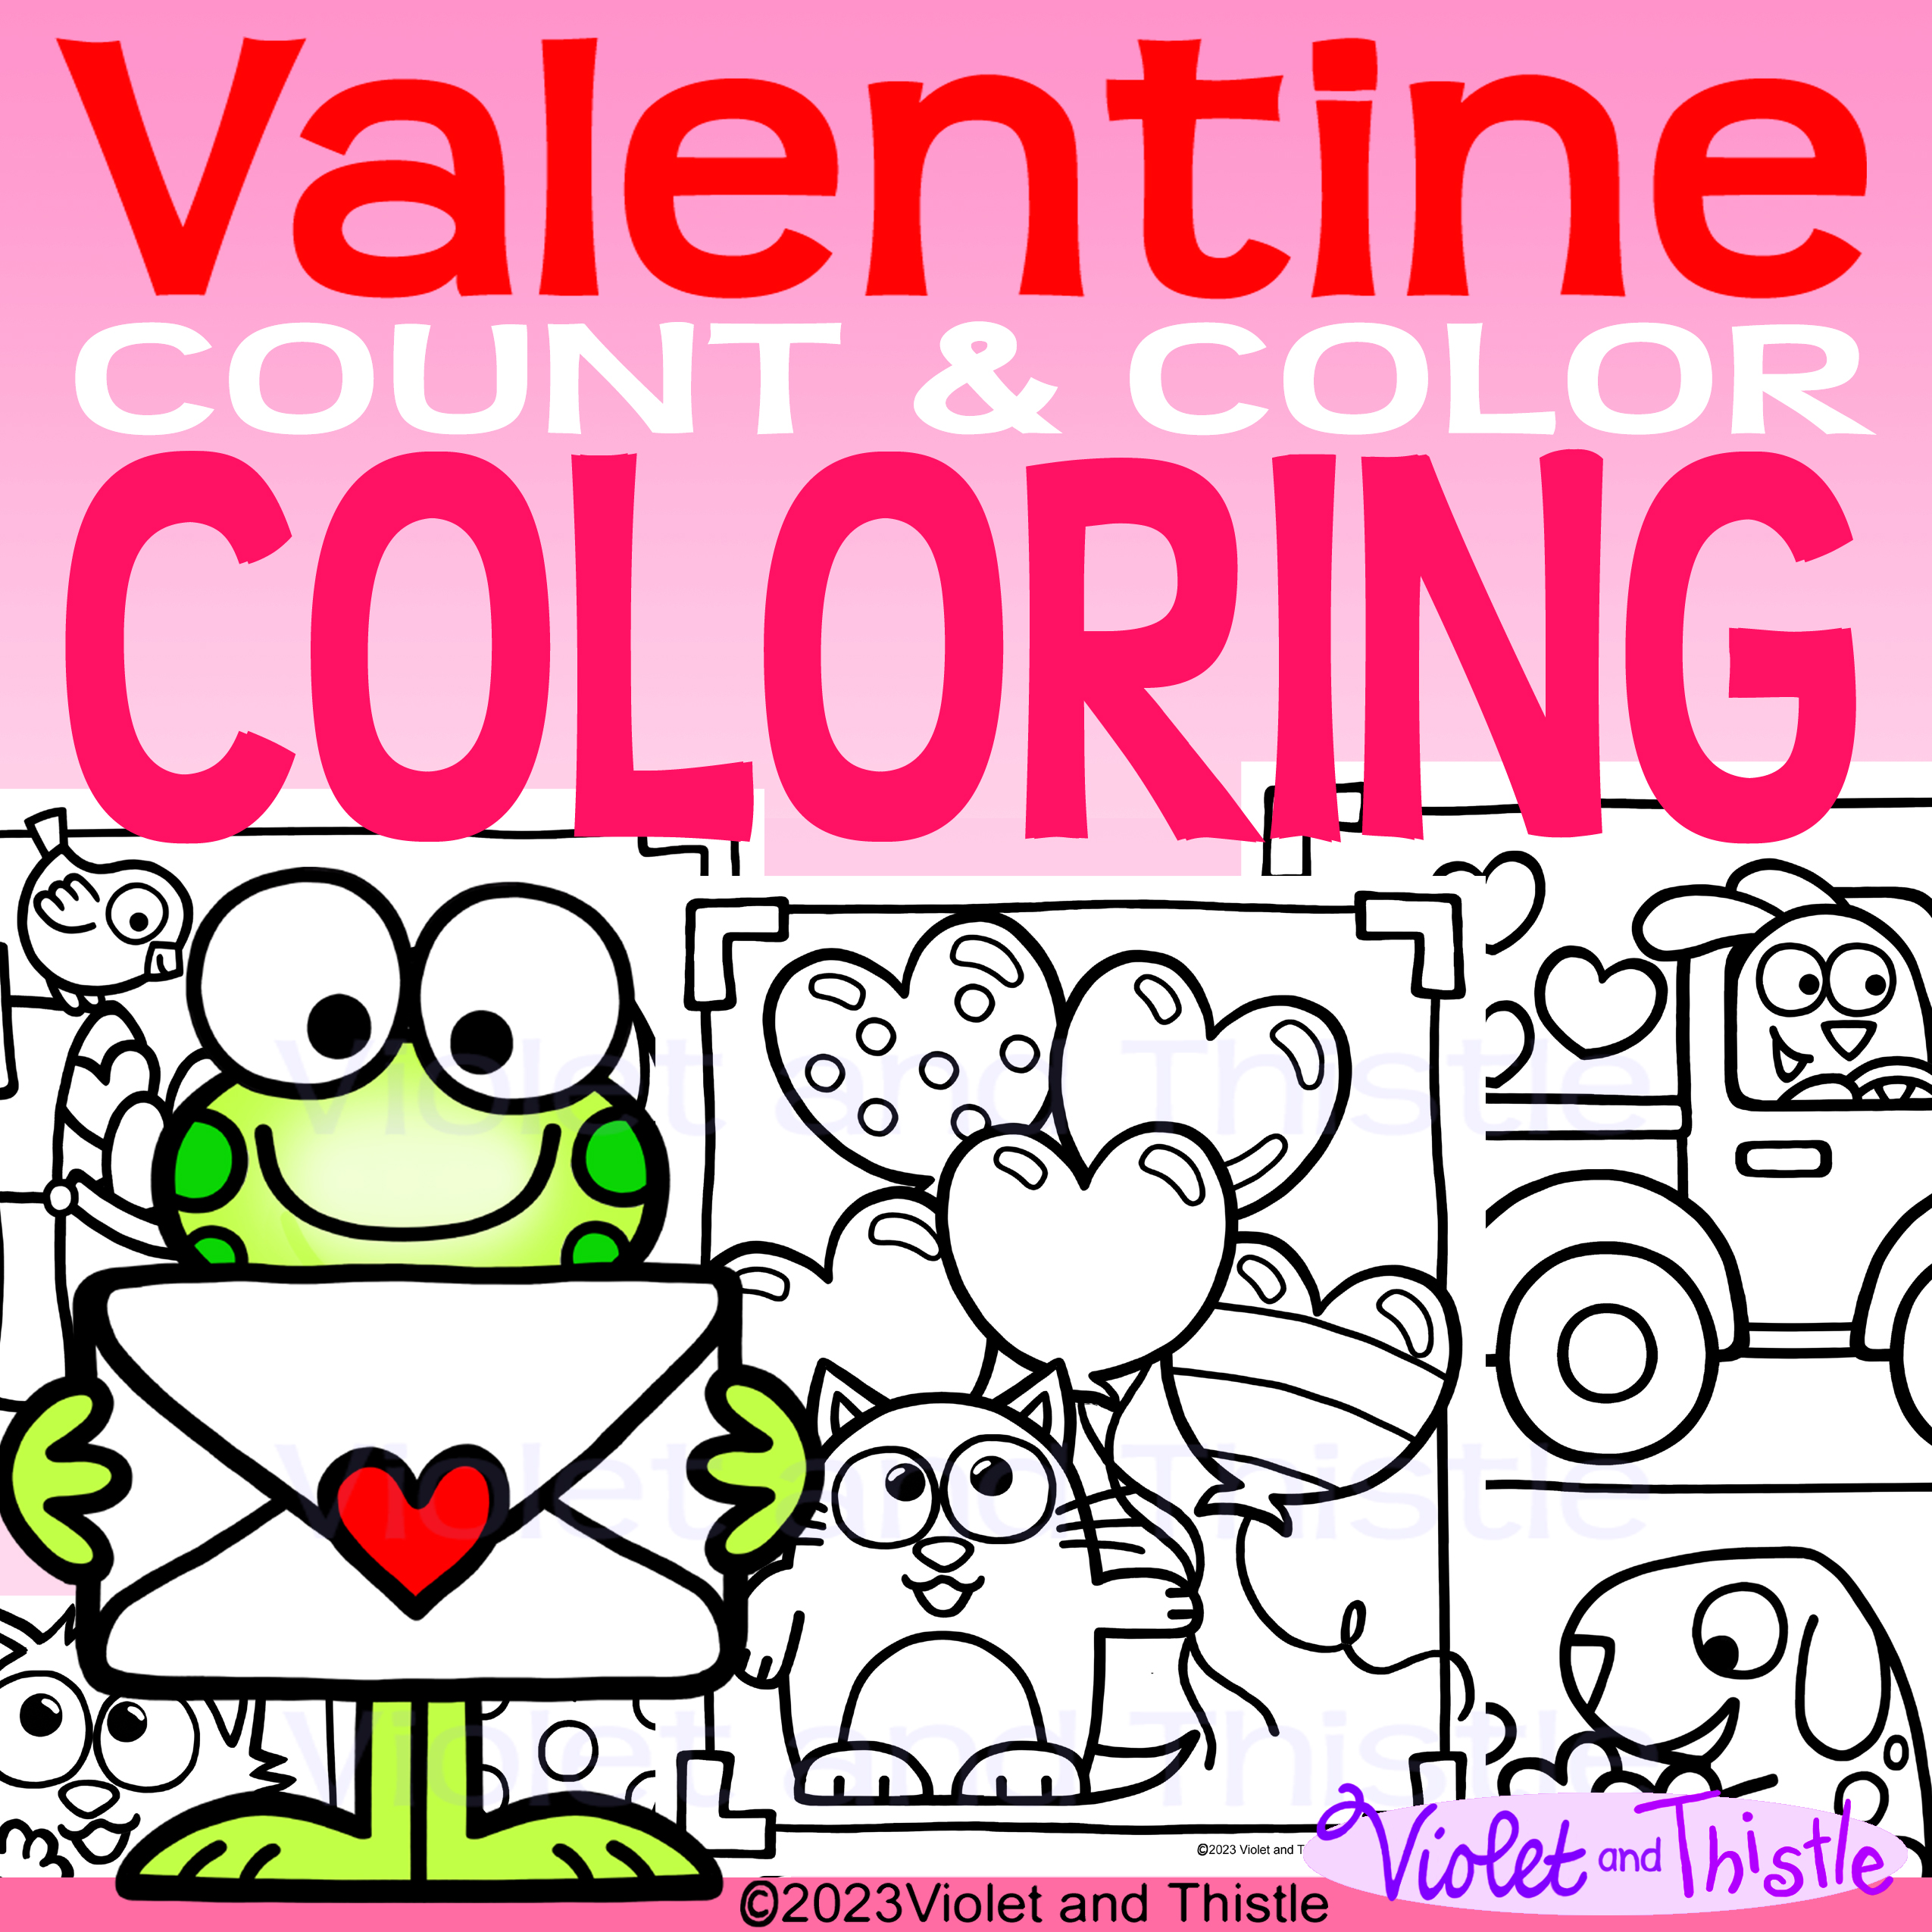 Valentine coloring pages cute heart truck dog cat frog bird color counting sheets math activity boys made by teachers